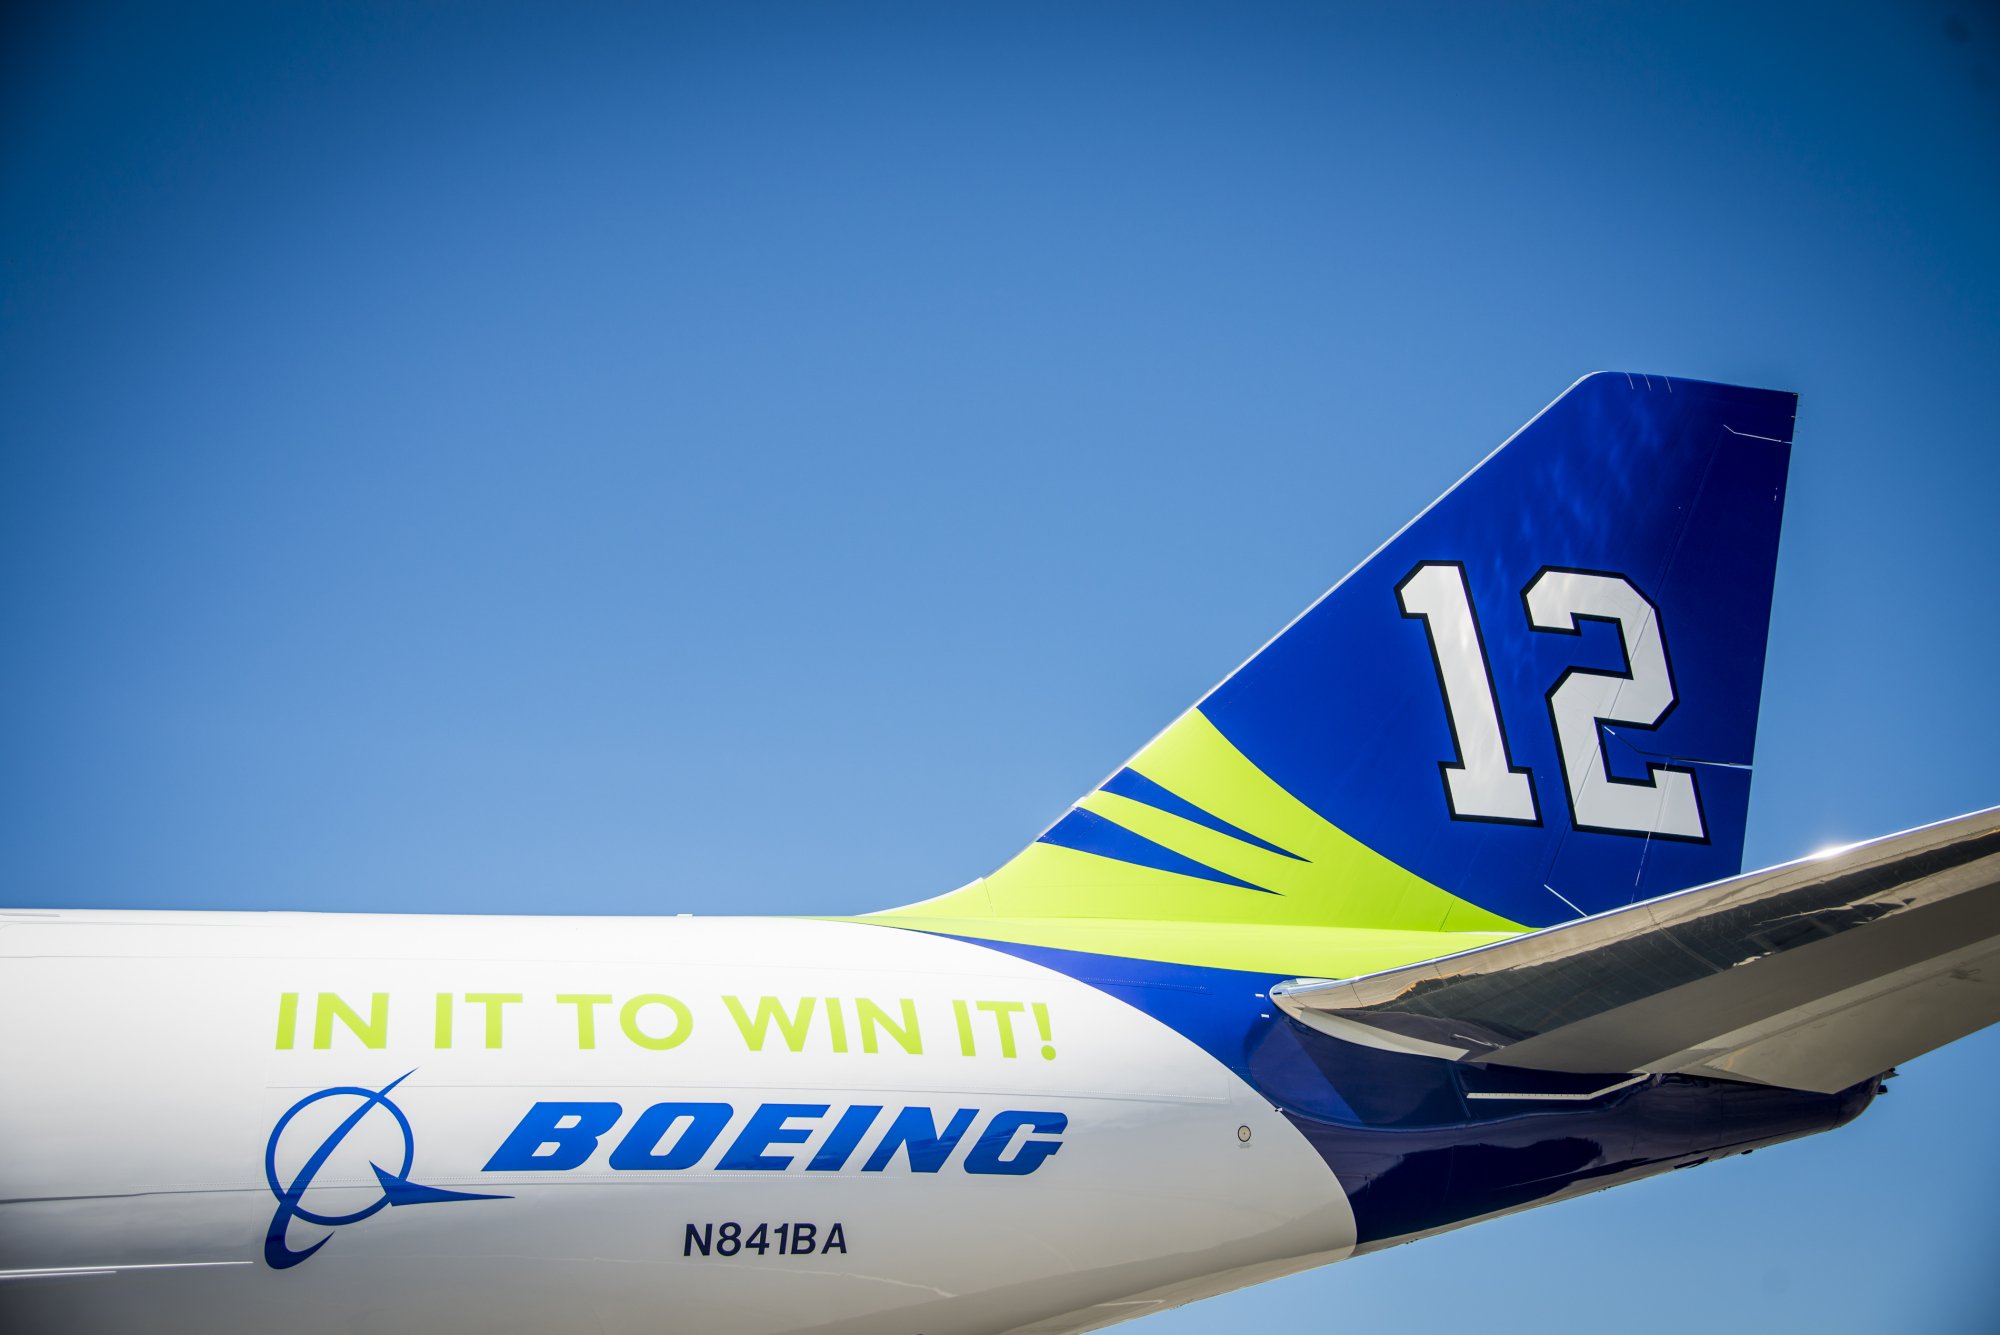 seattle, Seahawks, Nfl, Football, Aircraft, Airplane, Airliner, Boeing Wallpaper